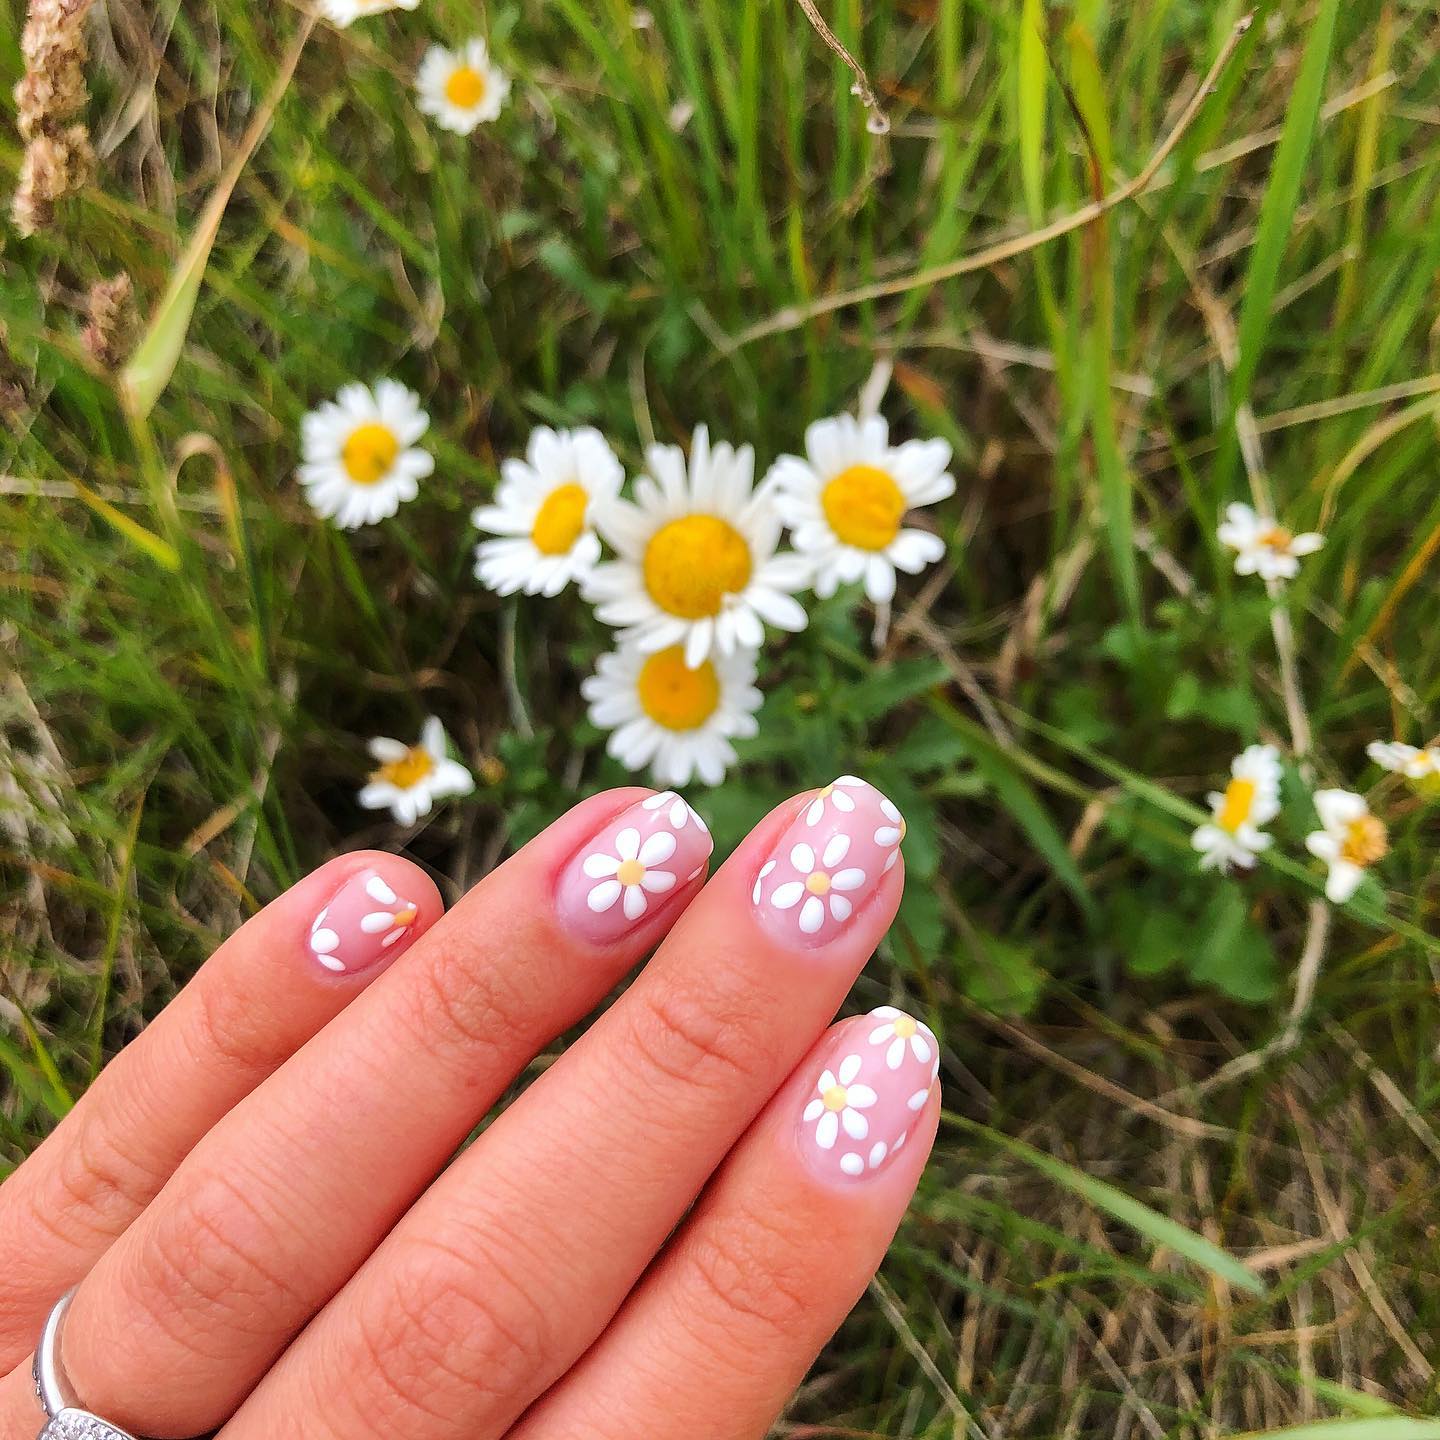 If you prefer to have bigger daisies in your nails, the example above is for you. You will rock, are you ready for it?